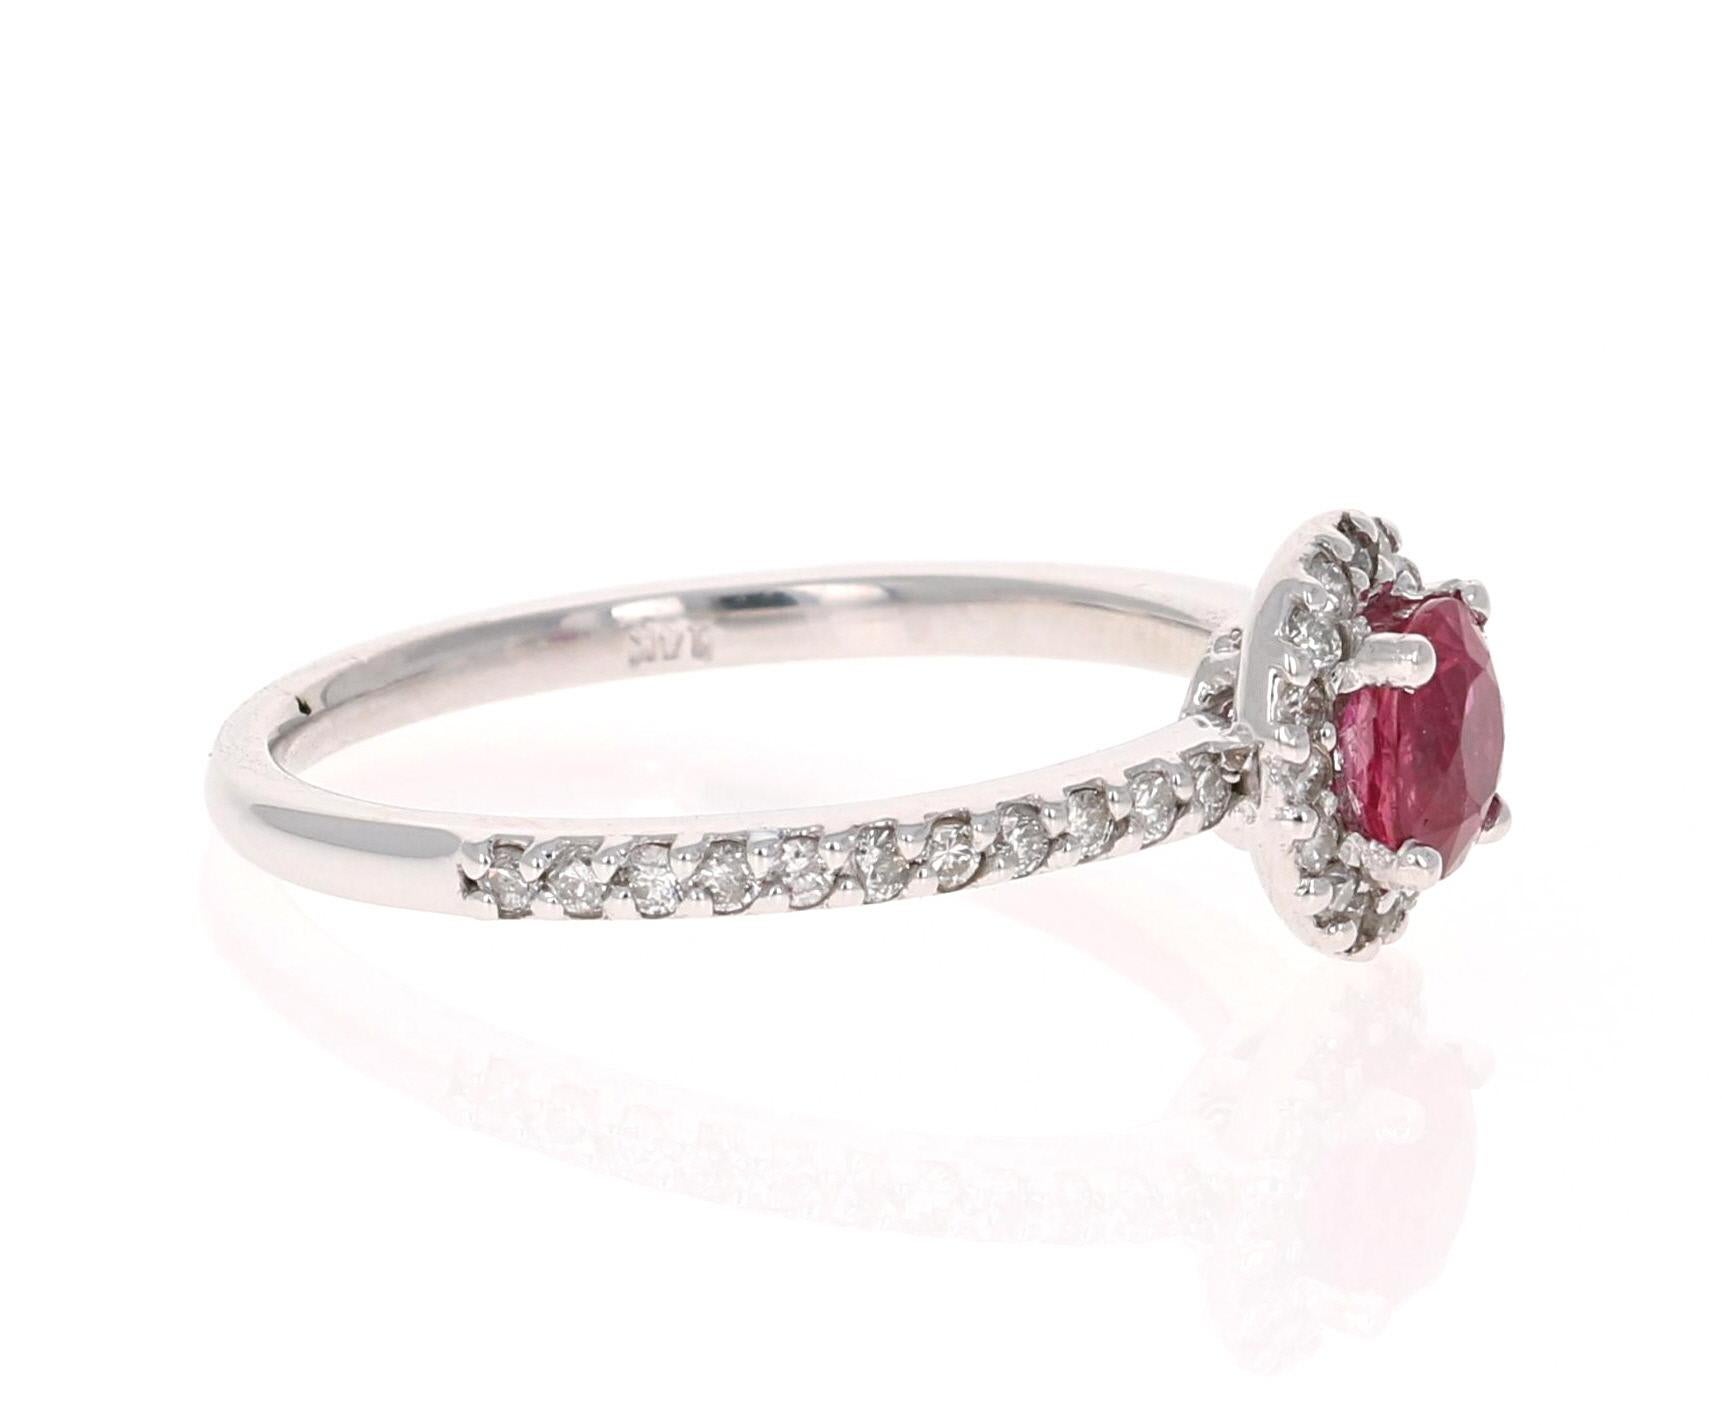 This elegant and dainty Ruby Diamond Ring can be a modern Engagement/Promise ring. It has a natural Burmese Ruby that is 0.65 Carats with a Halo of 38 Round Cut Diamonds weighing 0.37 Carats. 
It is set delicately in 14K White Gold and is a ring